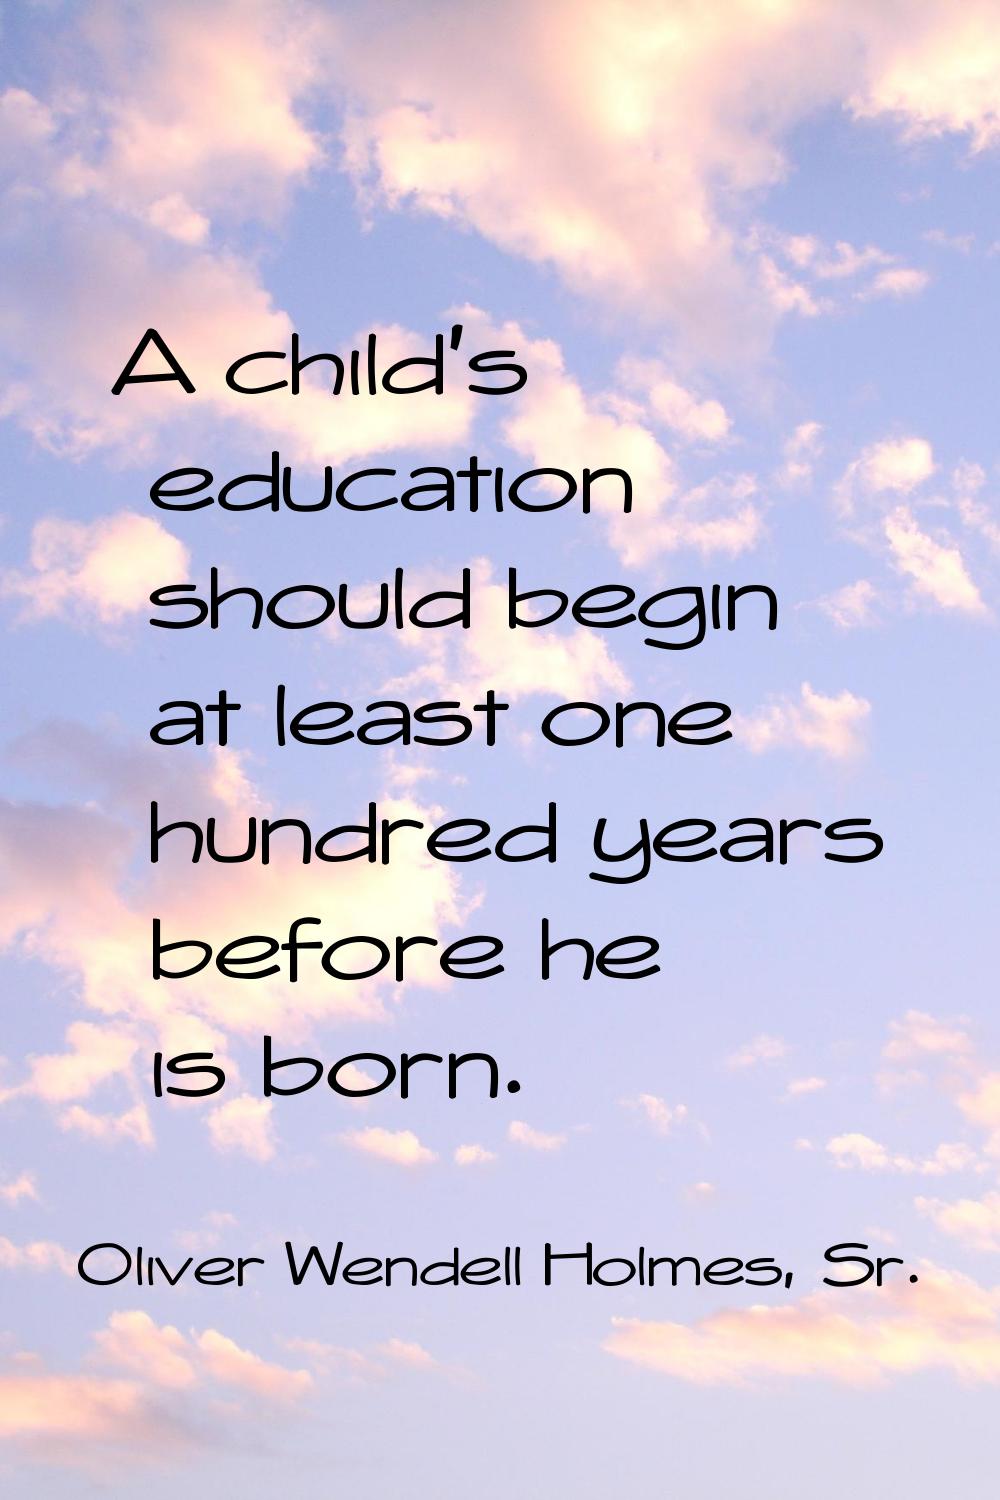 A child's education should begin at least one hundred years before he is born.